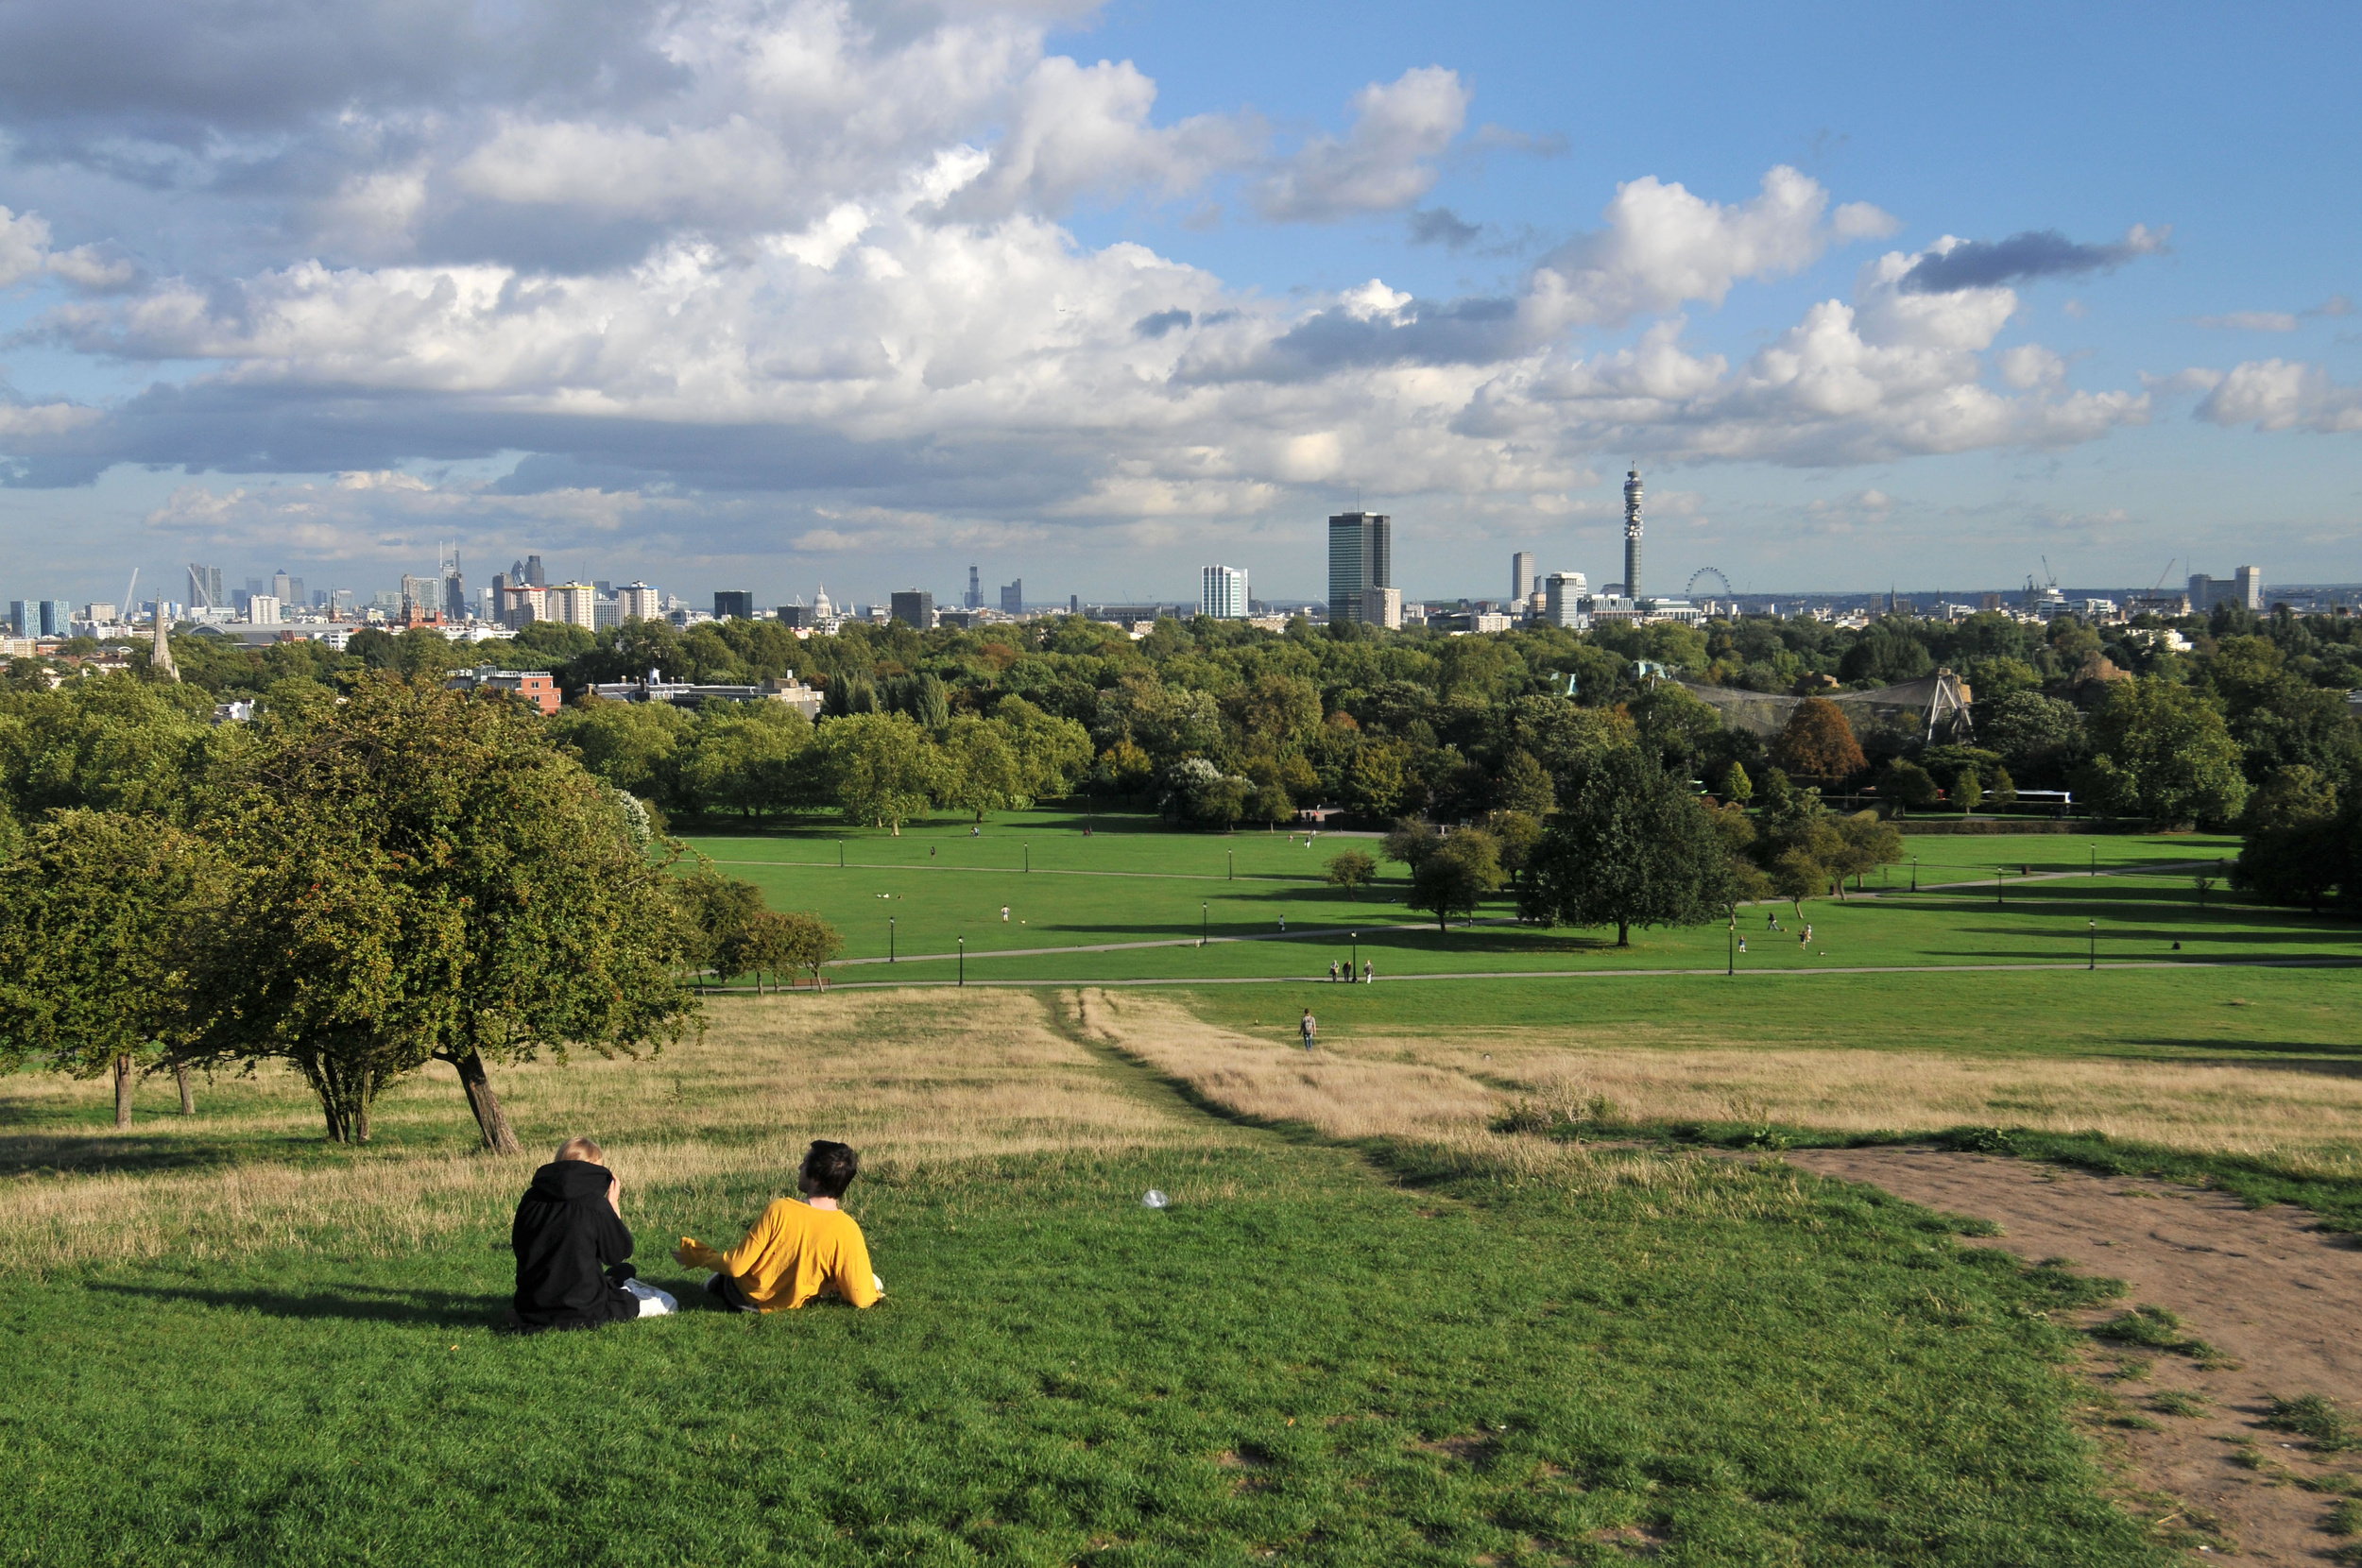 <p>Need a pic for Instagram? Head over to Primrose Hill for a view of London's skyline. </p><p>You may also like: <a href='https://www.yardbarker.com/lifestyle/articles/20_additions_that_will_make_your_blt_even_tastier_122723/s1__26177438'>20 additions that will make your BLT even tastier</a></p>